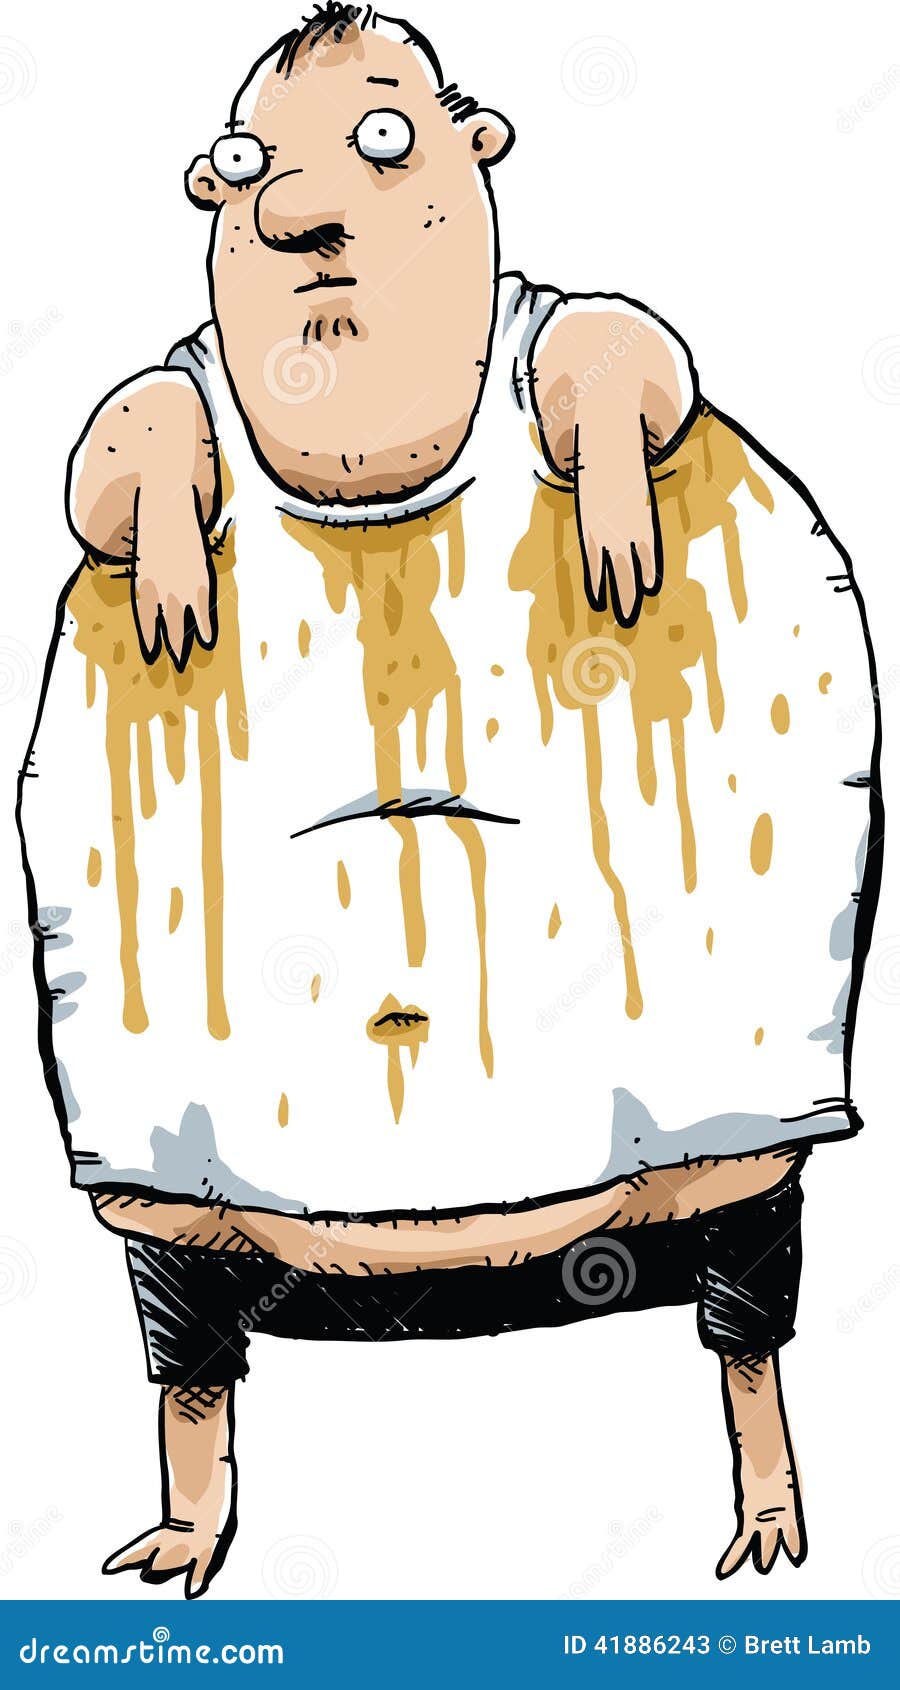 Big Sweat Stains stock illustration. Illustration of overweight - 41886243